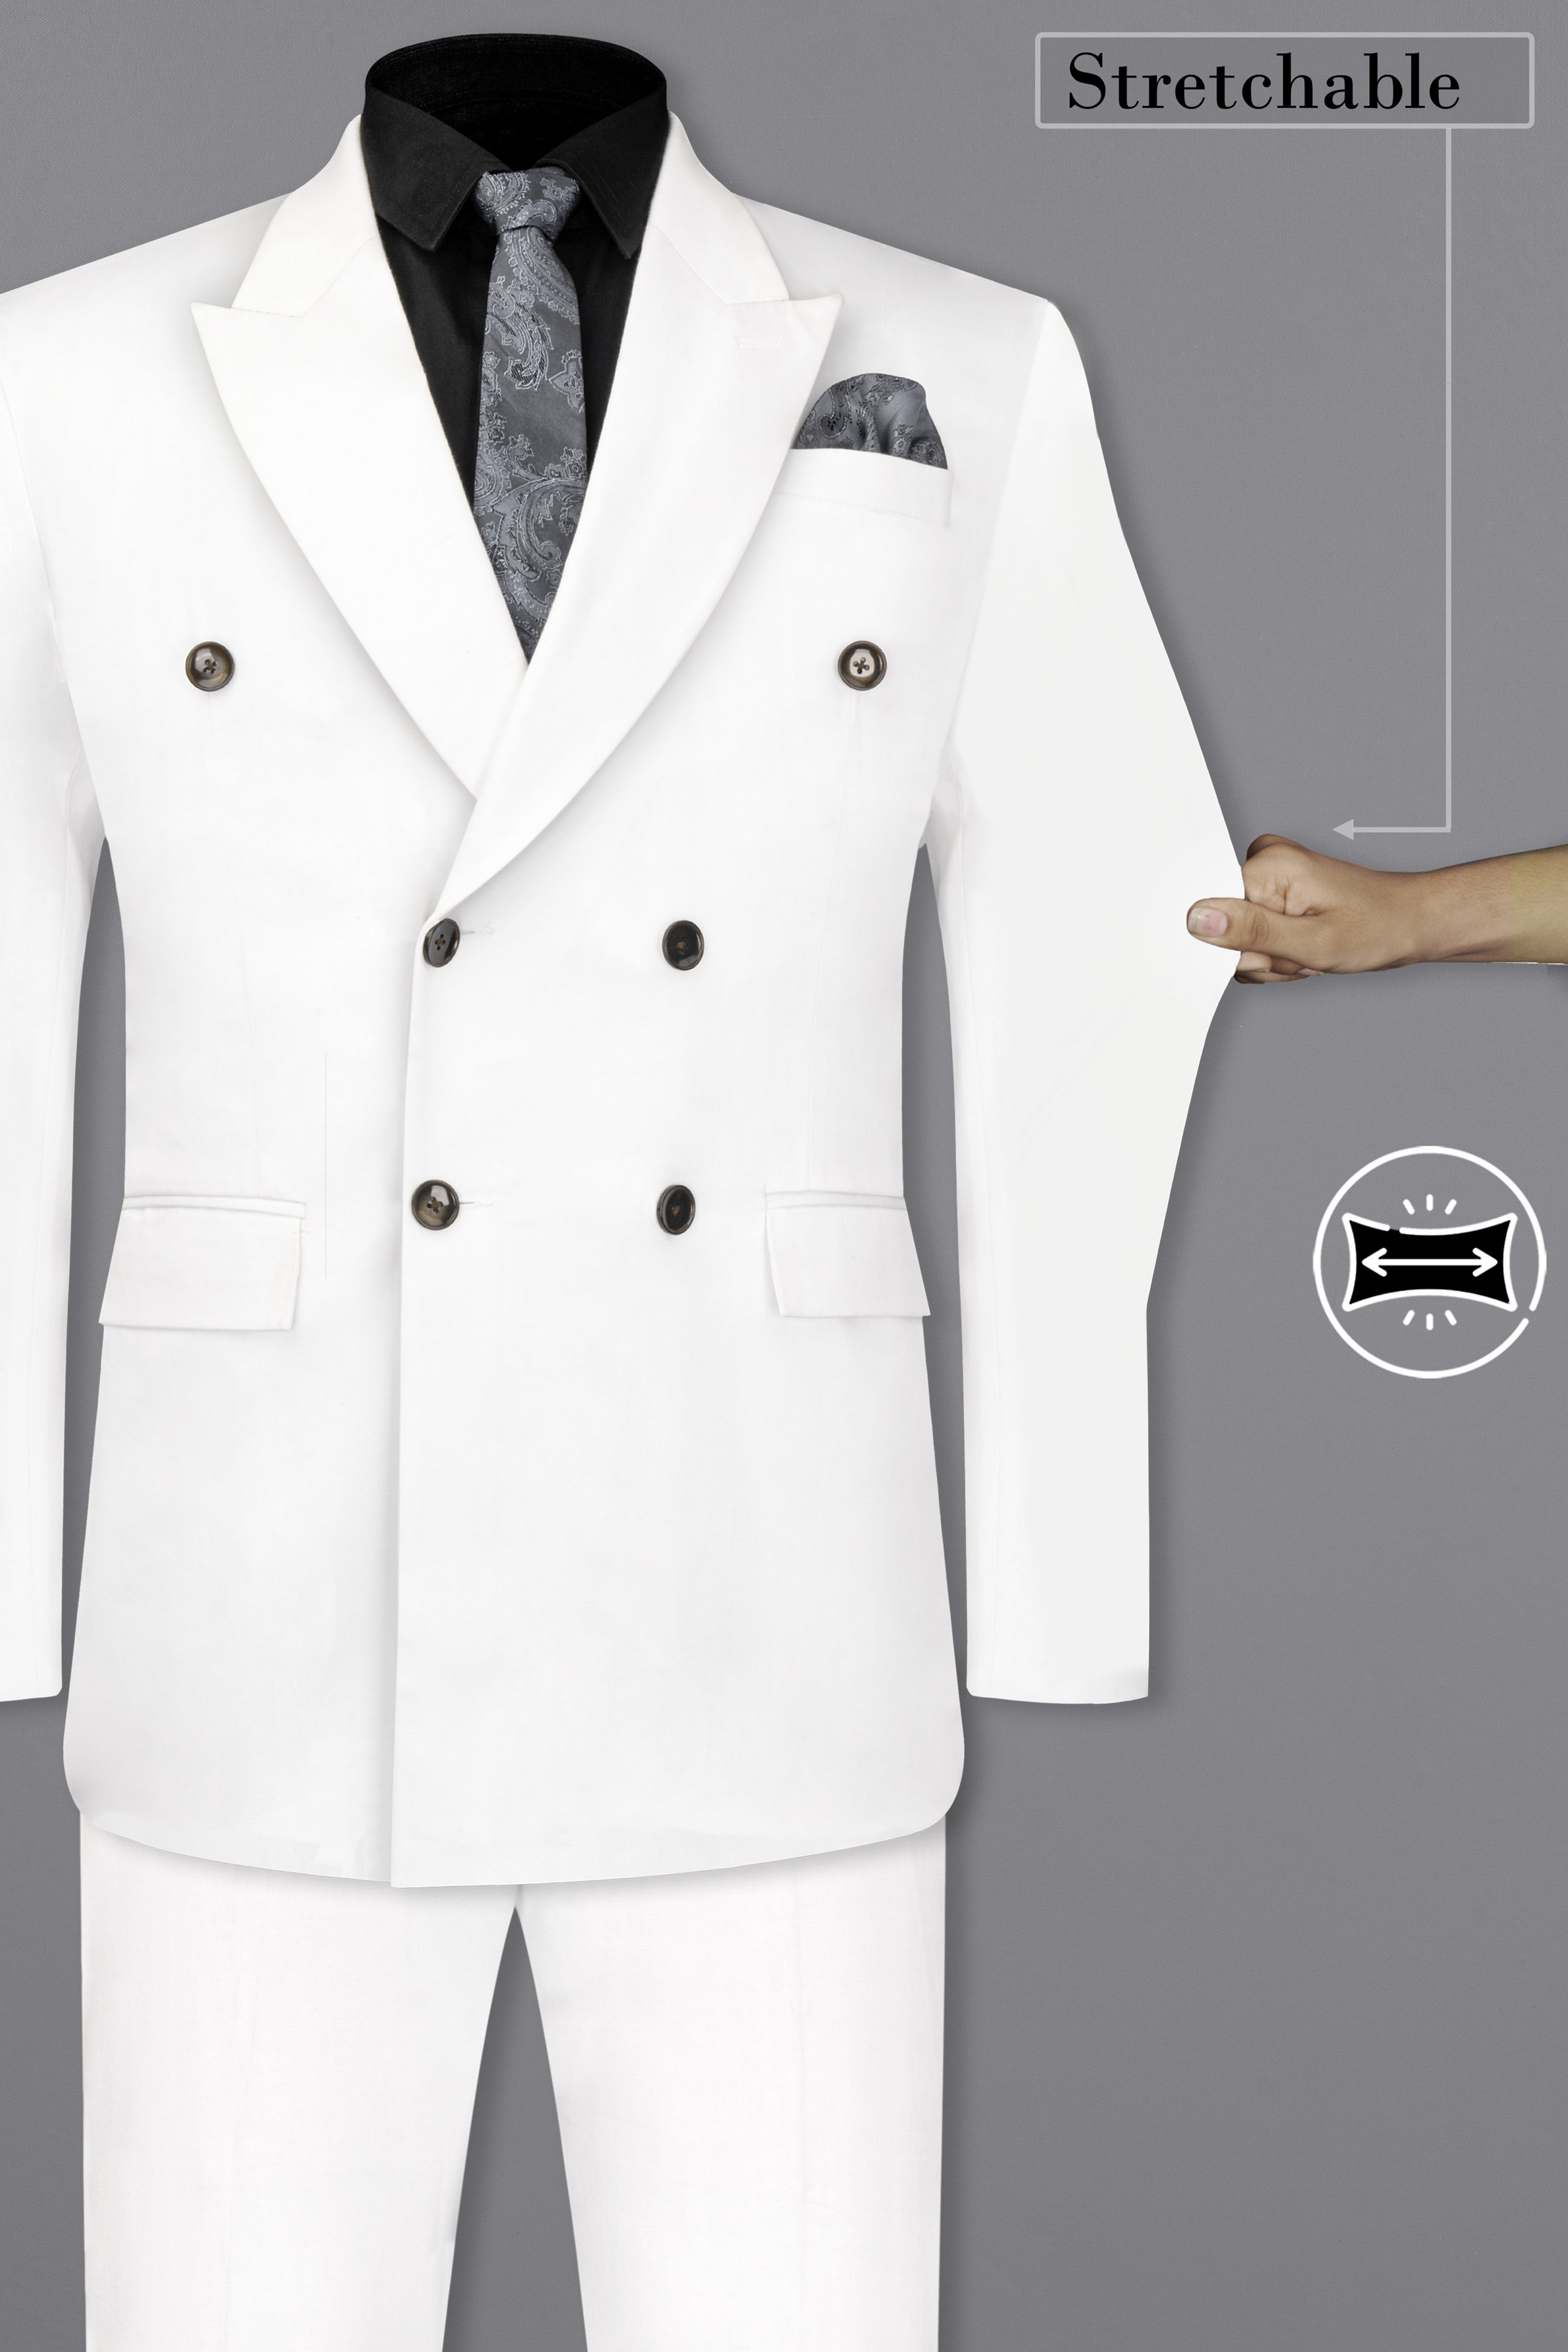 Bright White Solid Stretchable Premium Cotton Double Breasted Traveler Suit